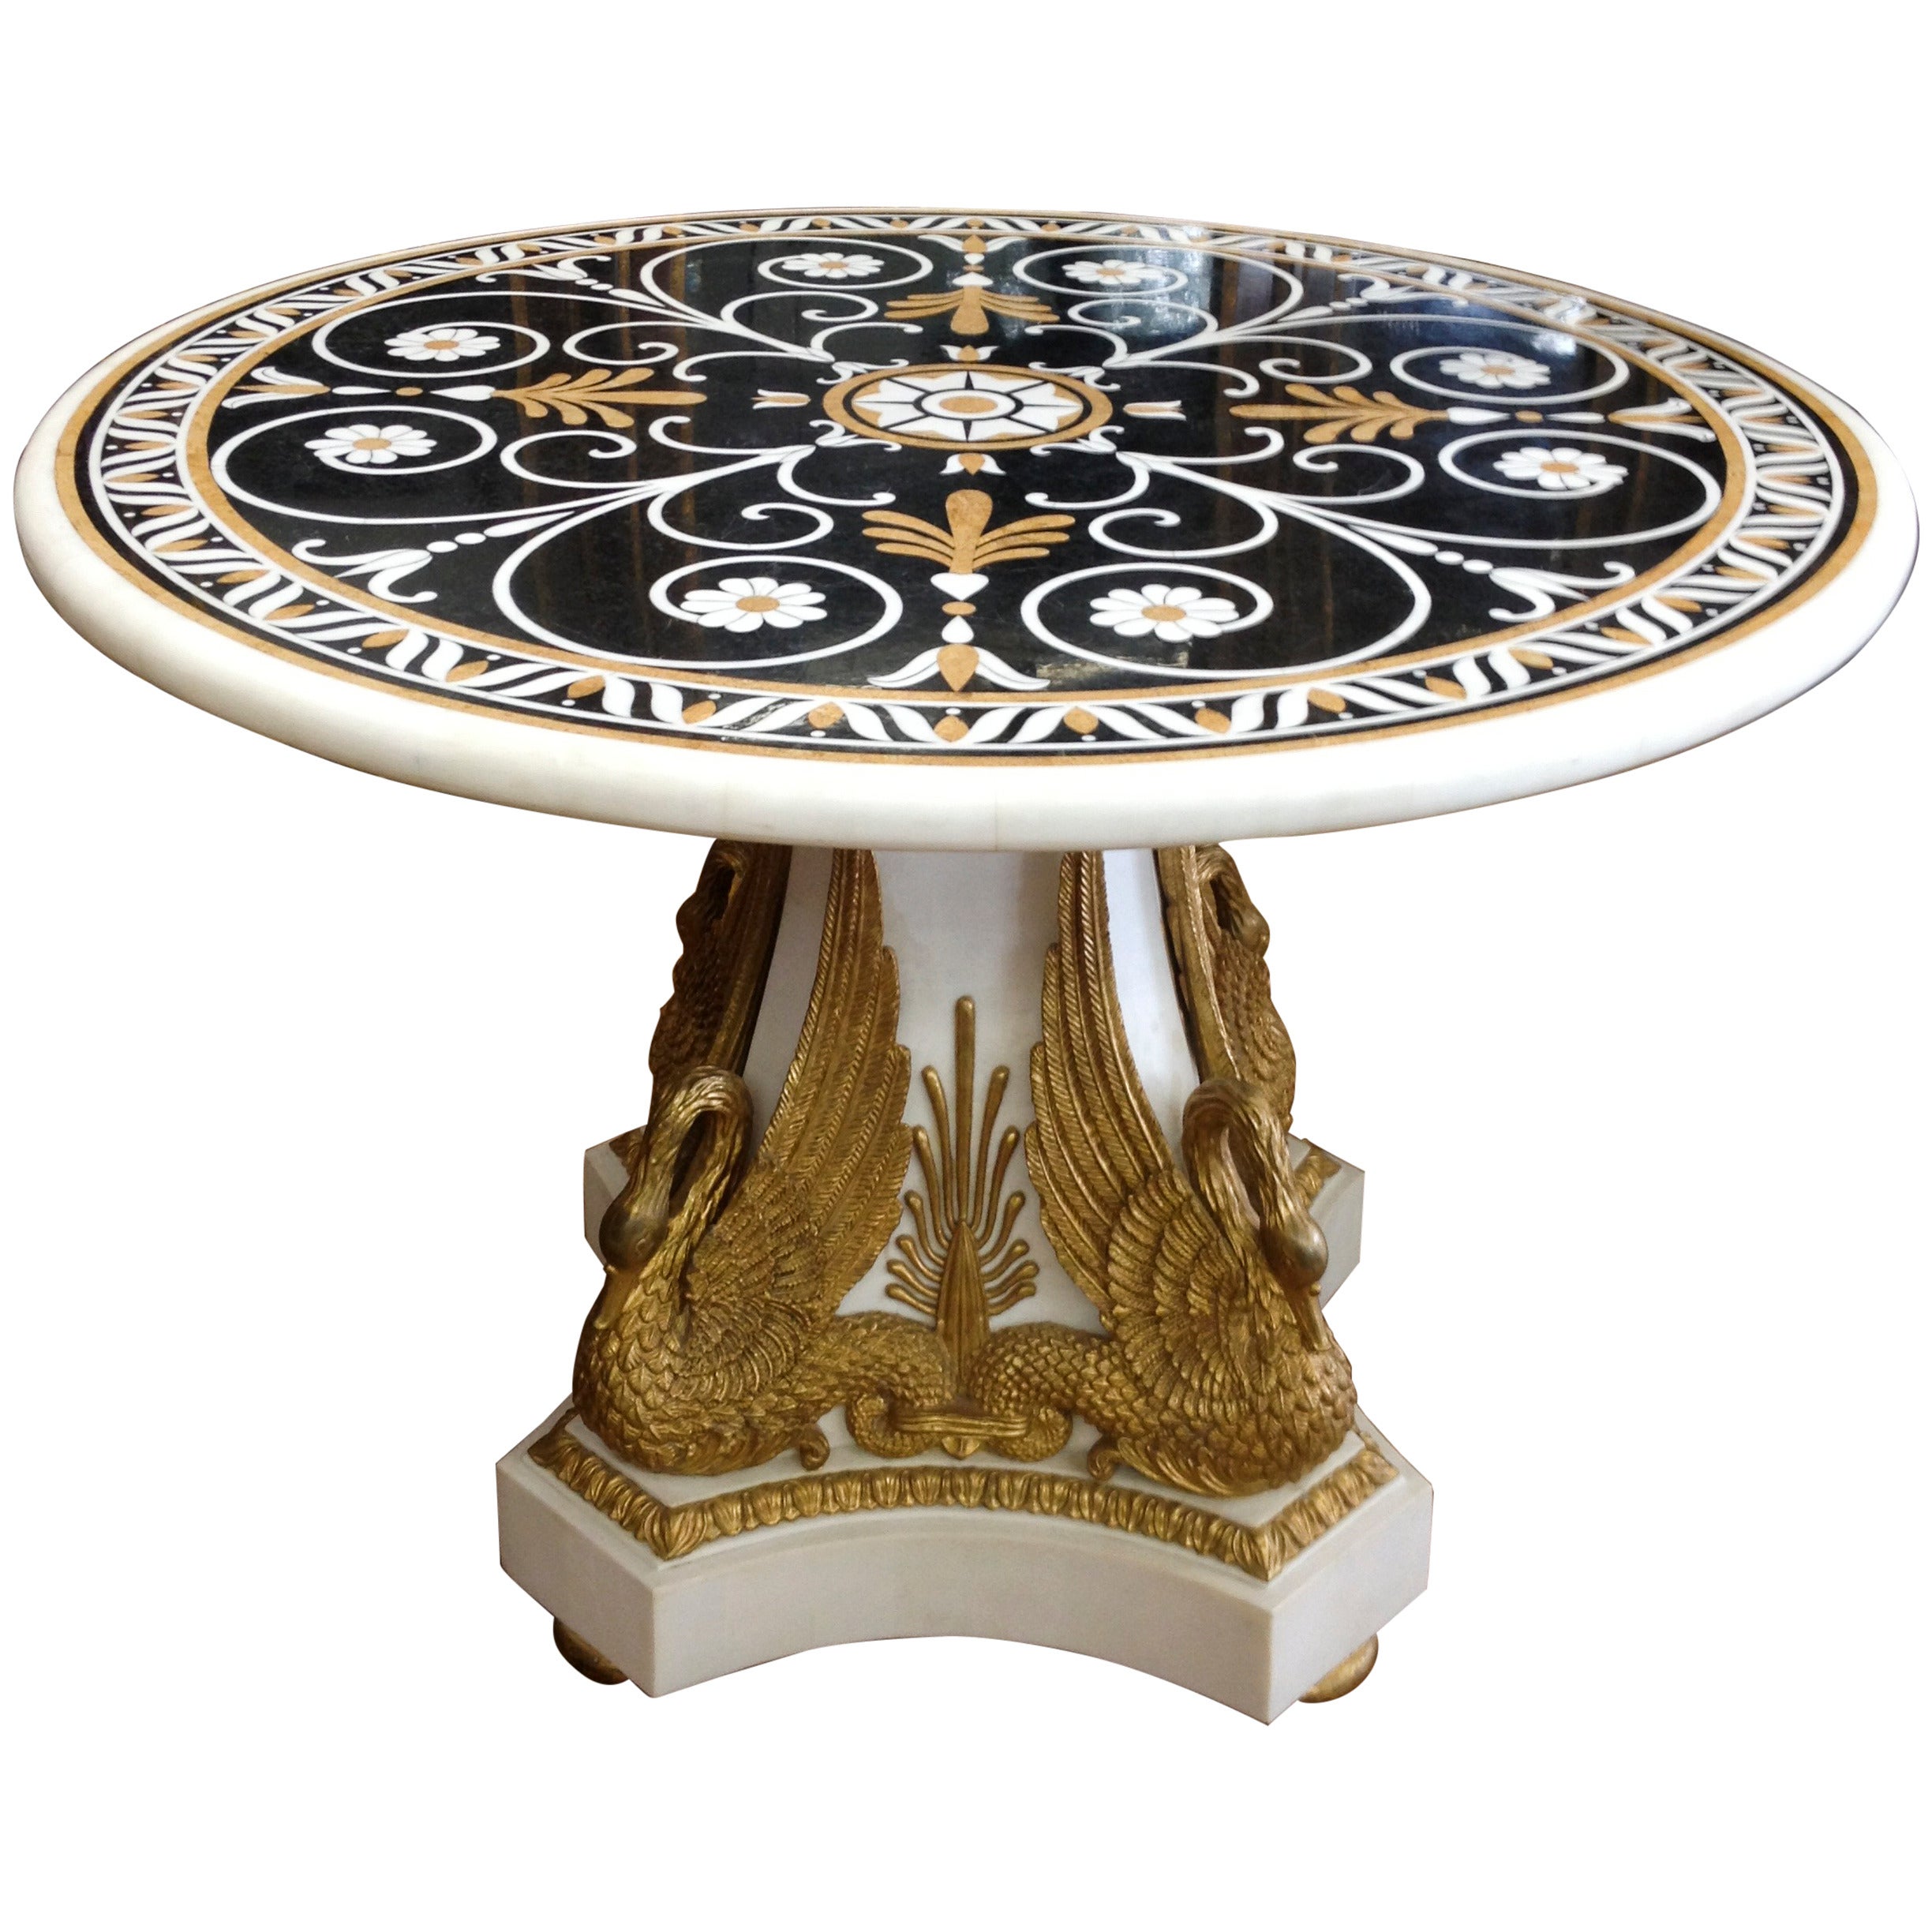 A 20th Century Italian Style Faux Marble Inlaid & Gilt Wood Mounted Center Table